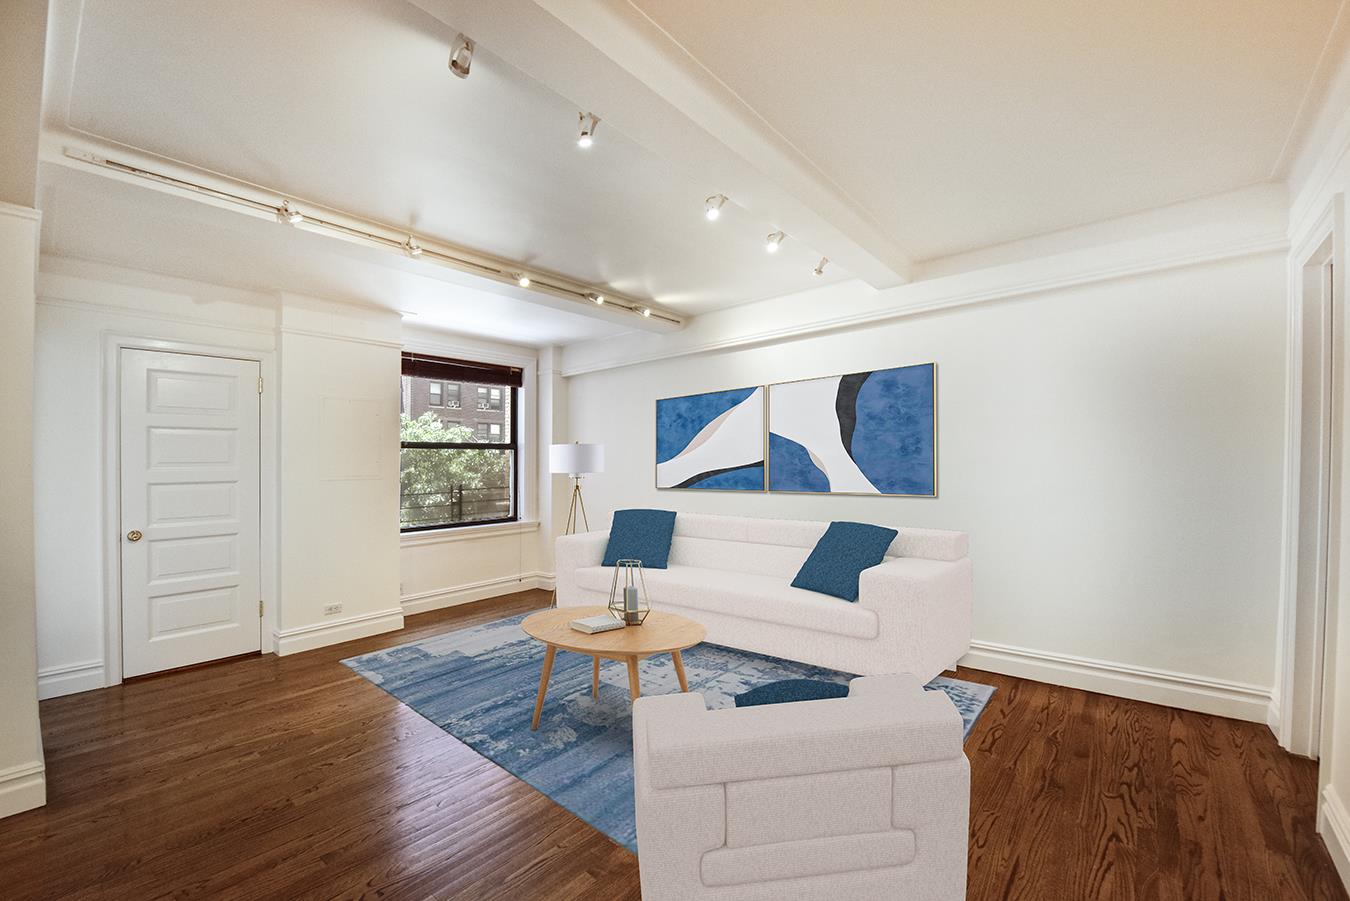 107 West 86th Street 4-EF Upper West Side New York NY 10024